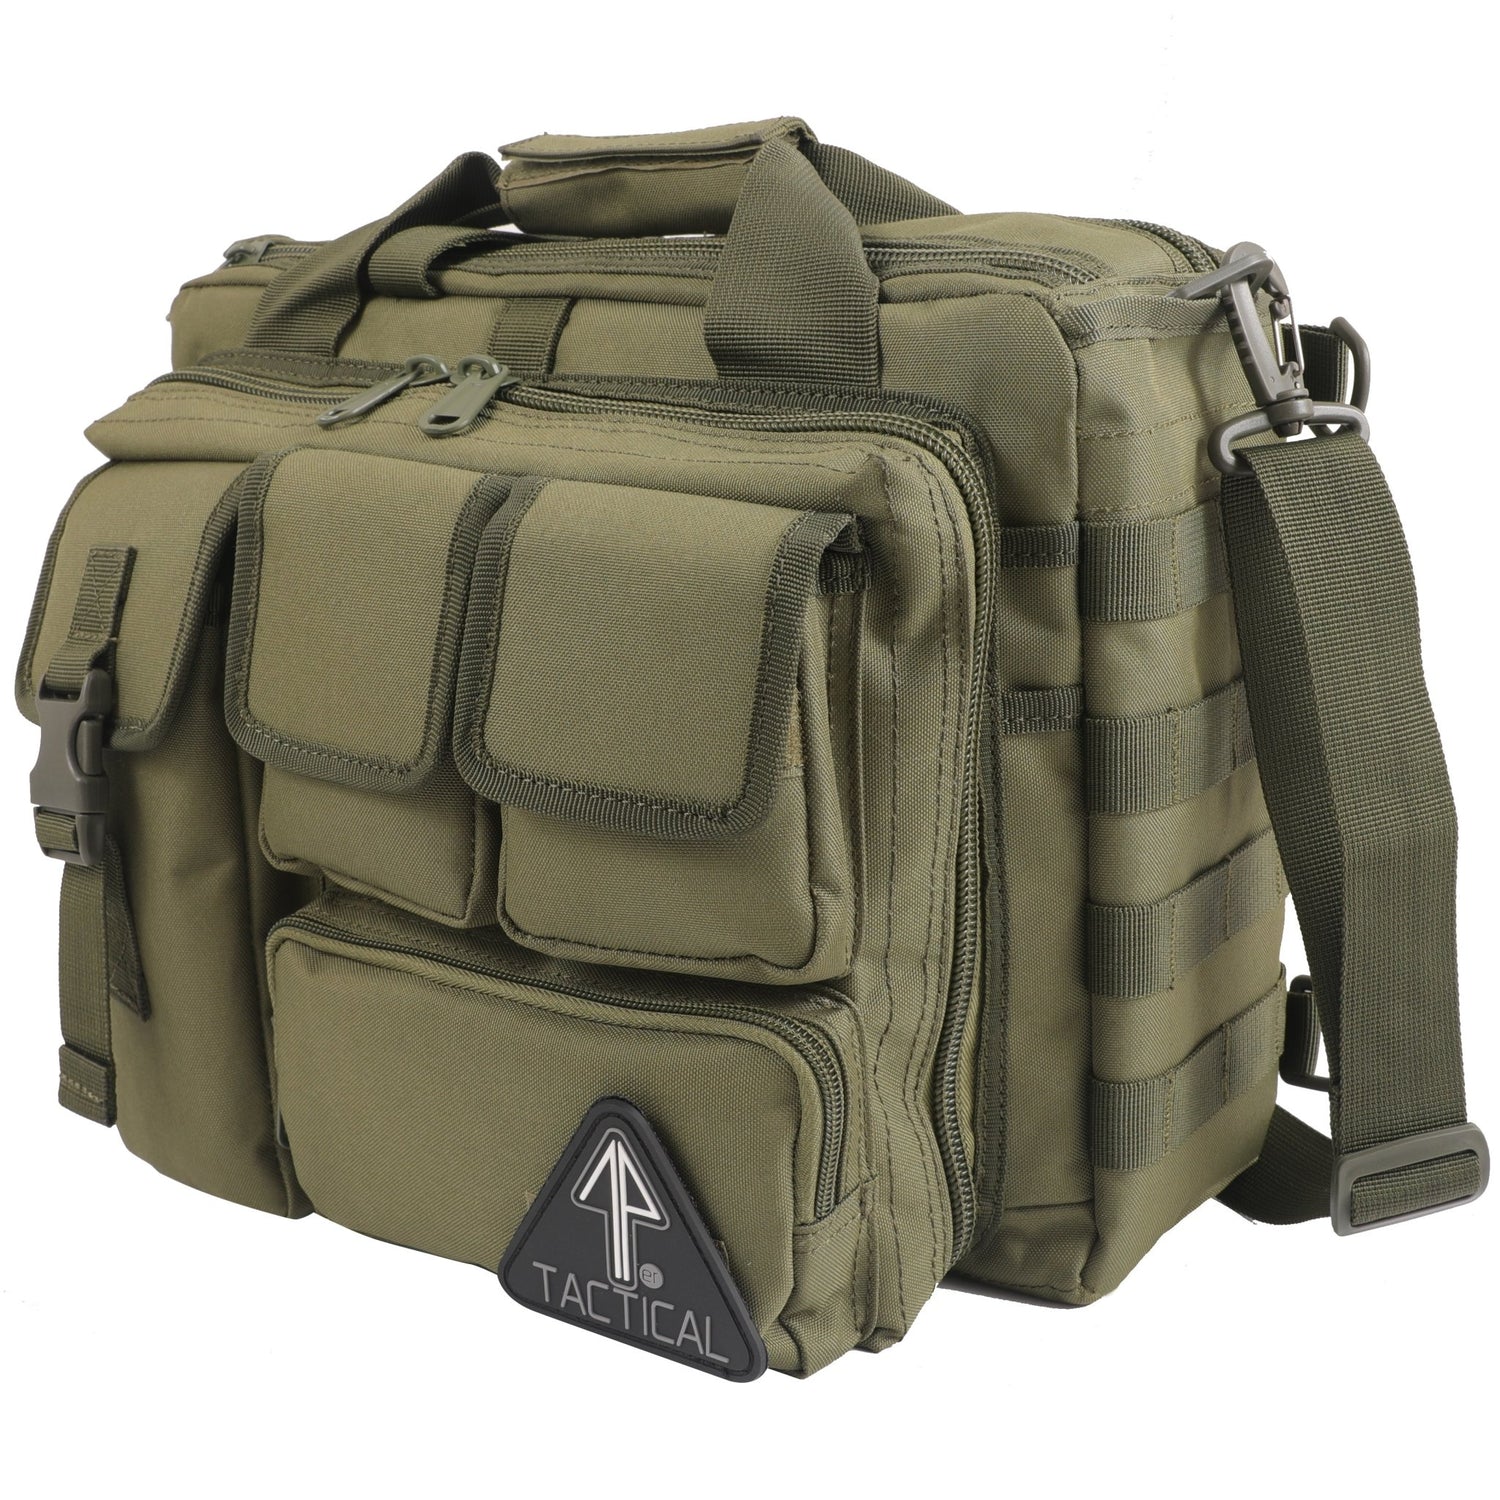 MOLLE System: What is MOLLE, Who Uses It and How Does MOLLE Work? – 14er  Tactical